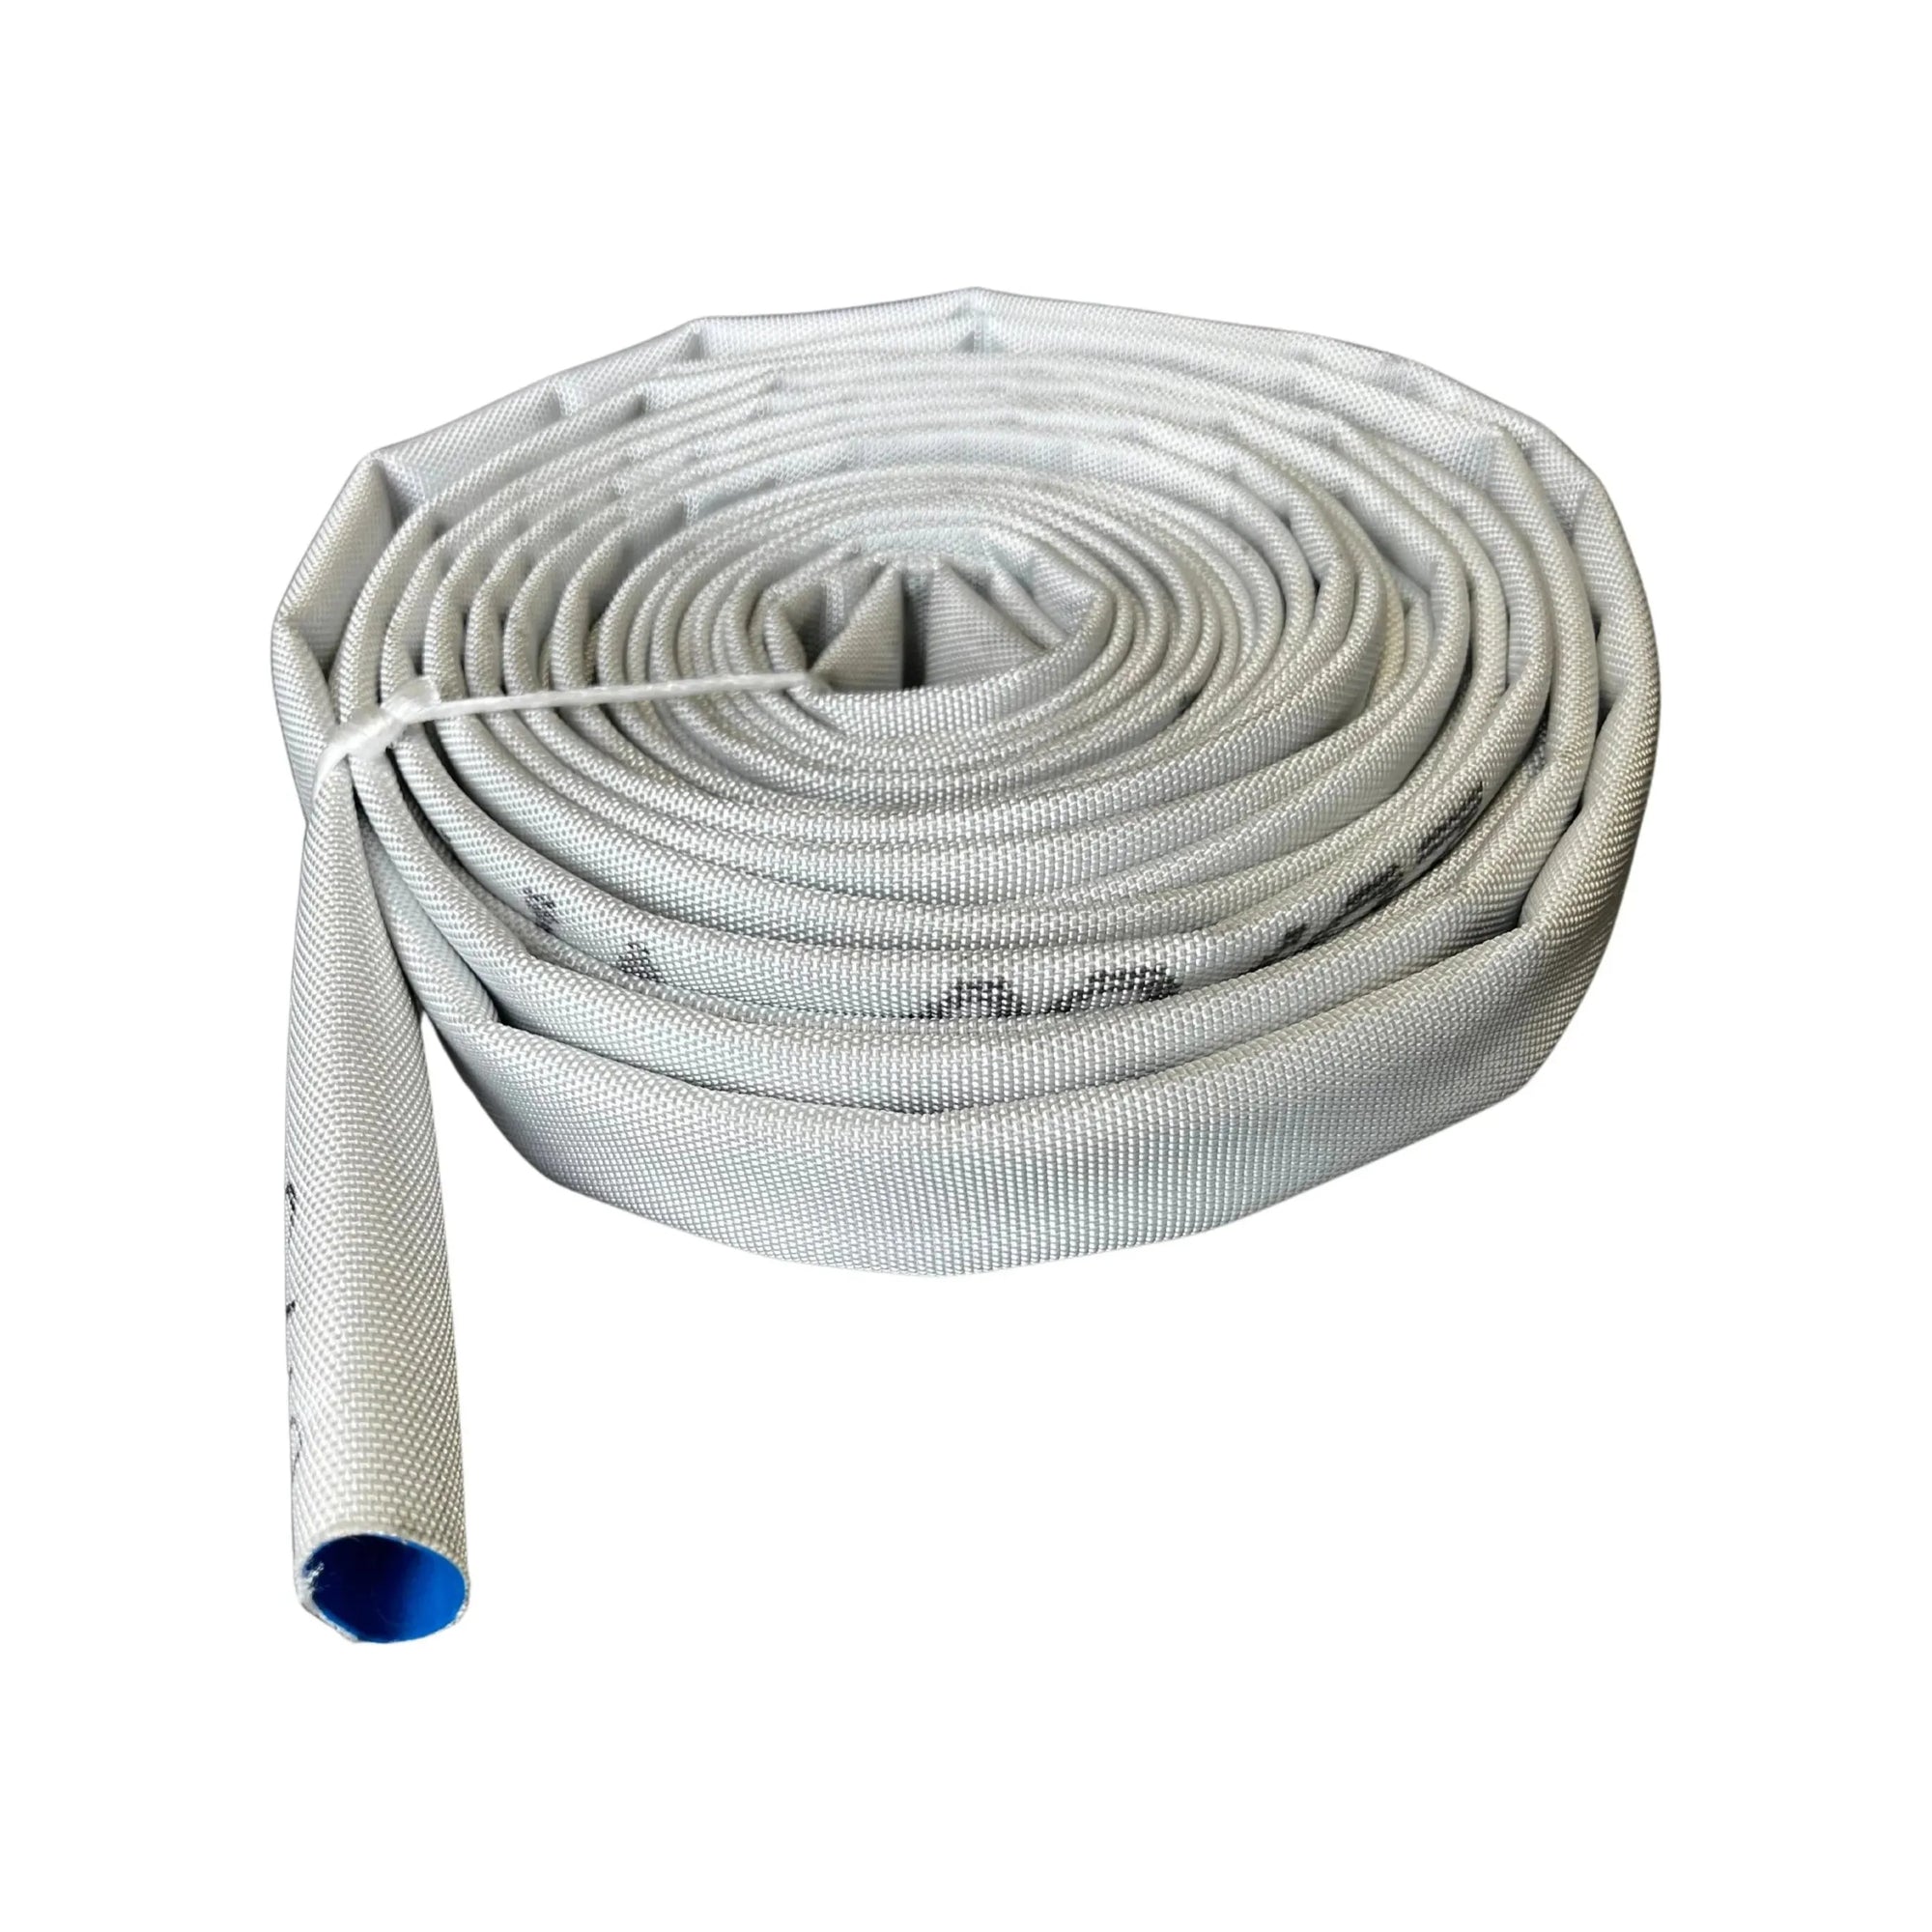 Excalibur Fire Hose 25mm Odd Lengths Clearance Stock